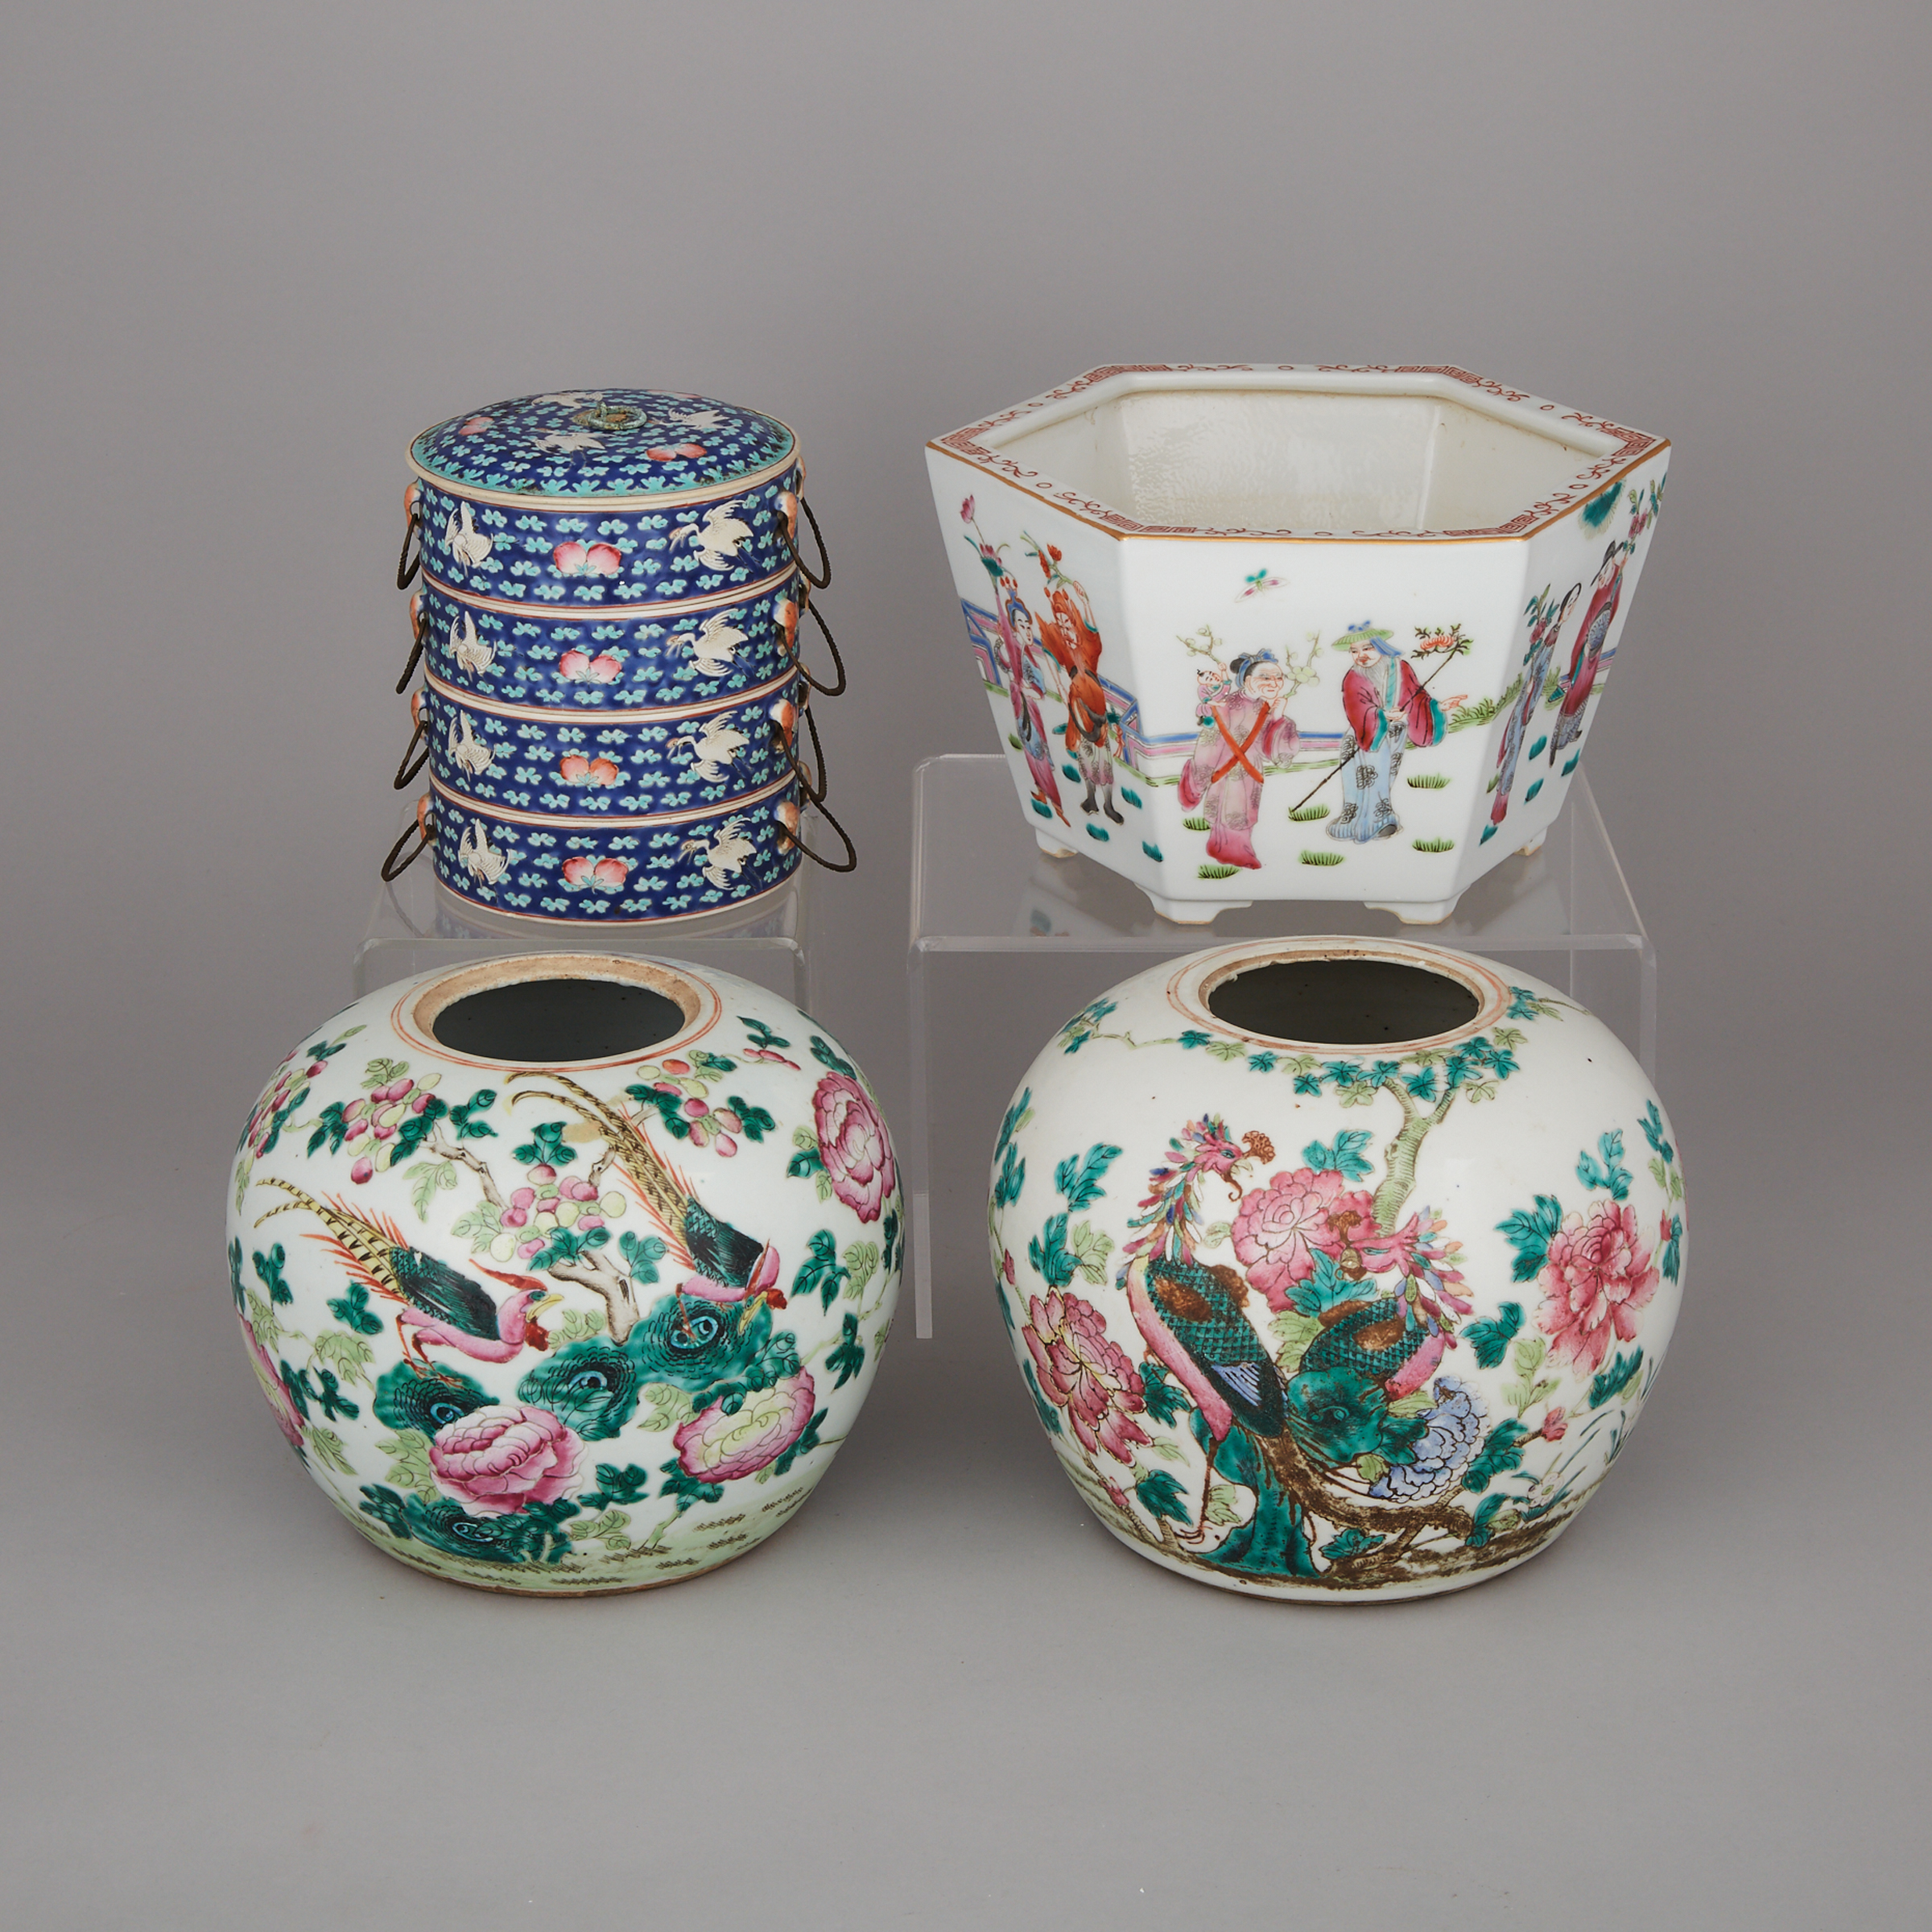 A Group of Four Enameled Porcelain Wares